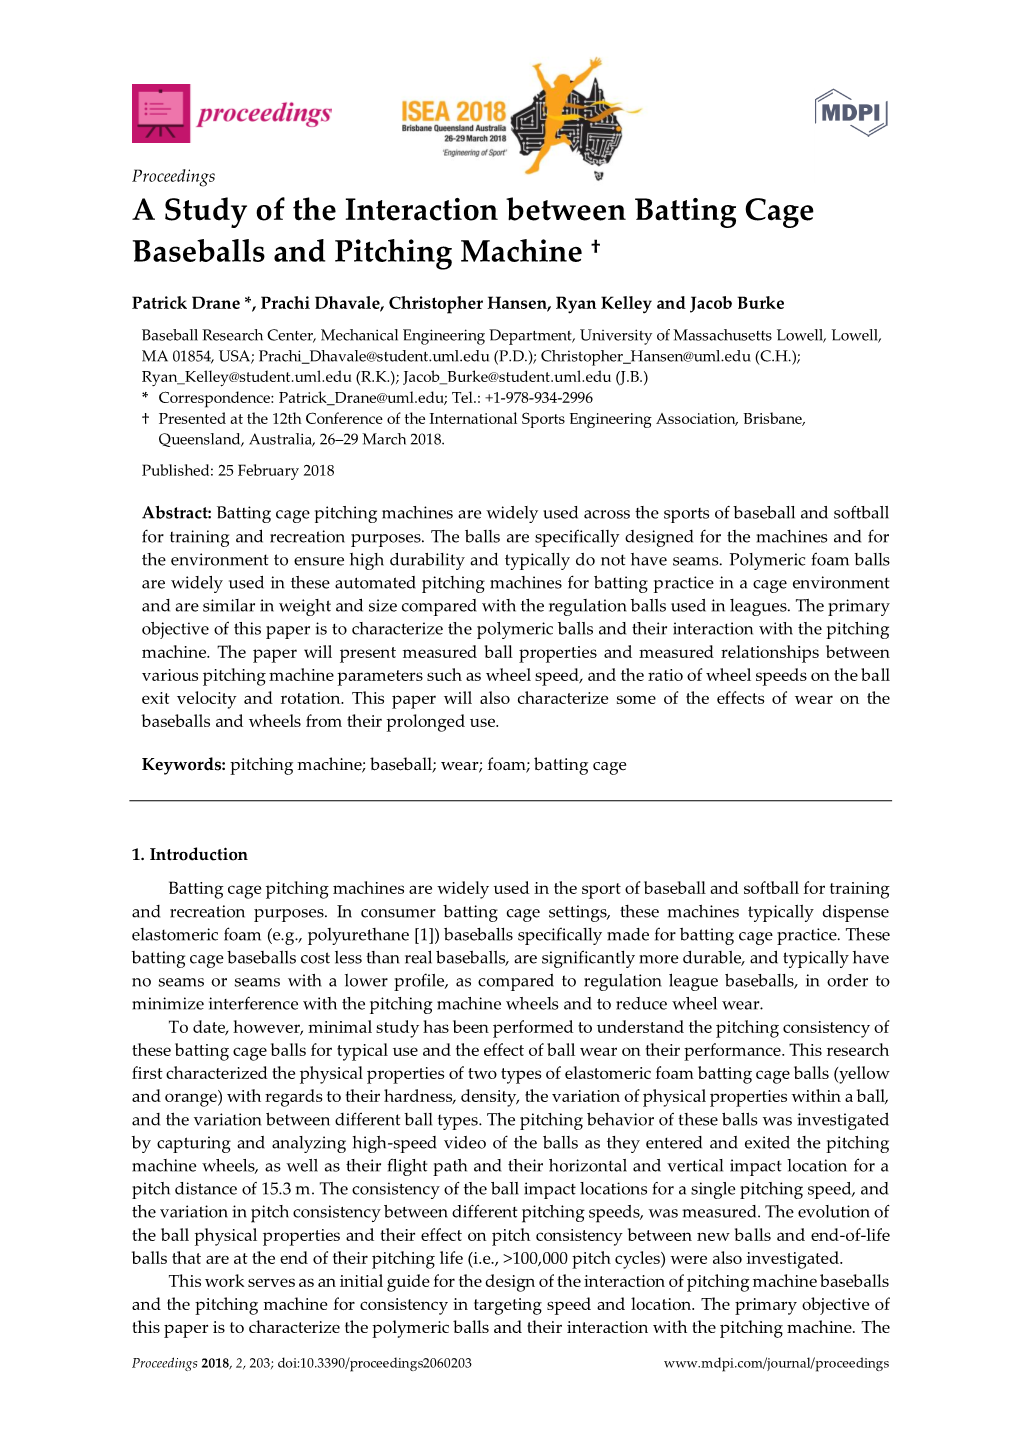 A Study of the Interaction Between Batting Cage Baseballs and Pitching Machine †